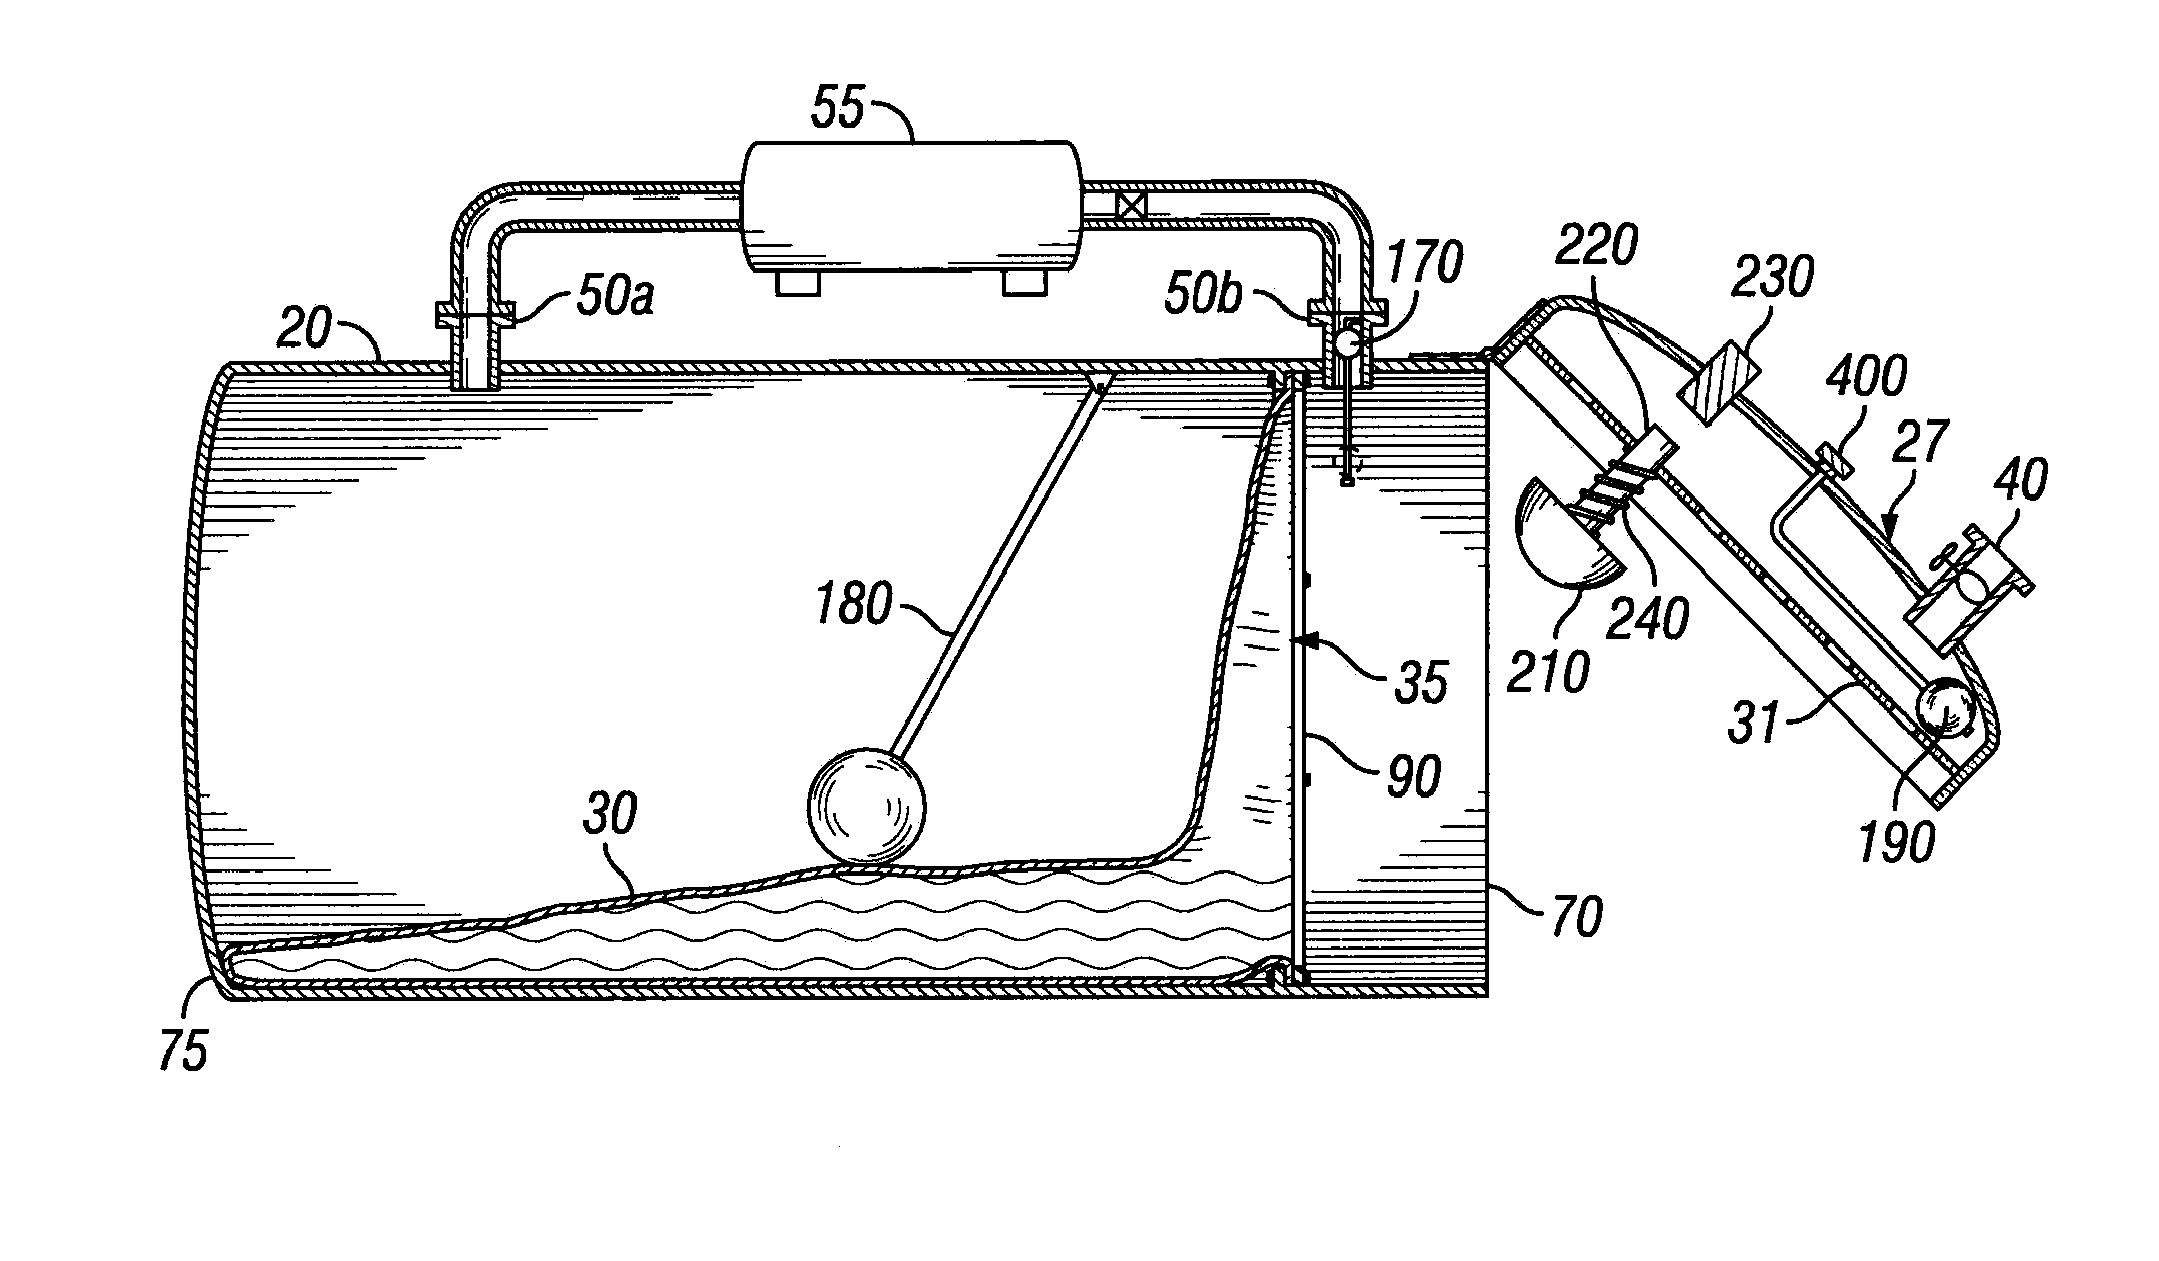 Bladder and engagement device for storage tank